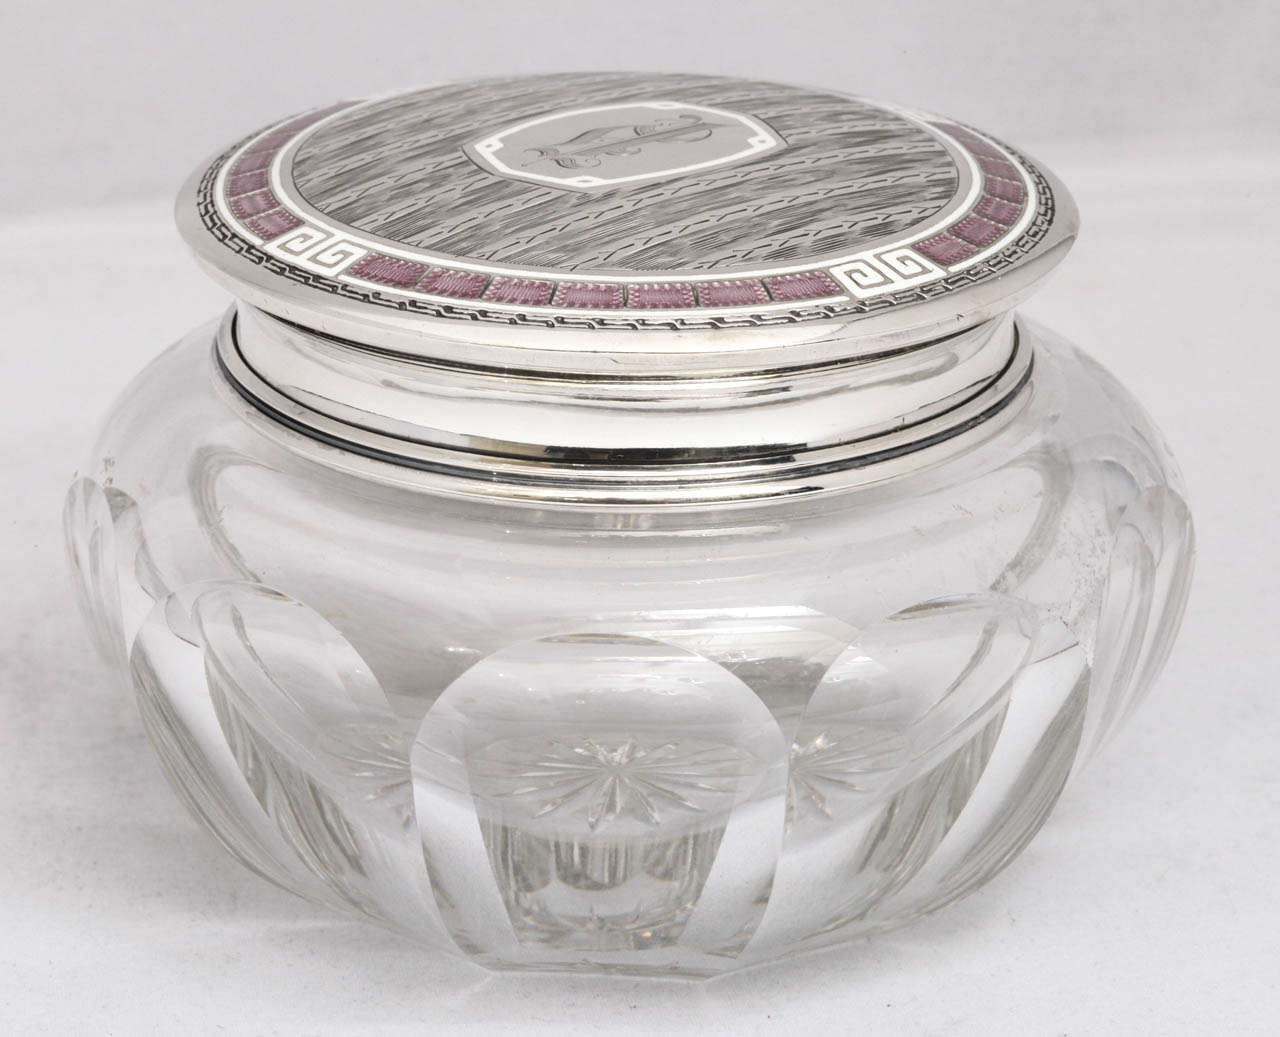 Unusual Kerr Art Deco Powder Jar Mounted By a Sterling Silver and Purple and White Guiloche Enamel Lid 1